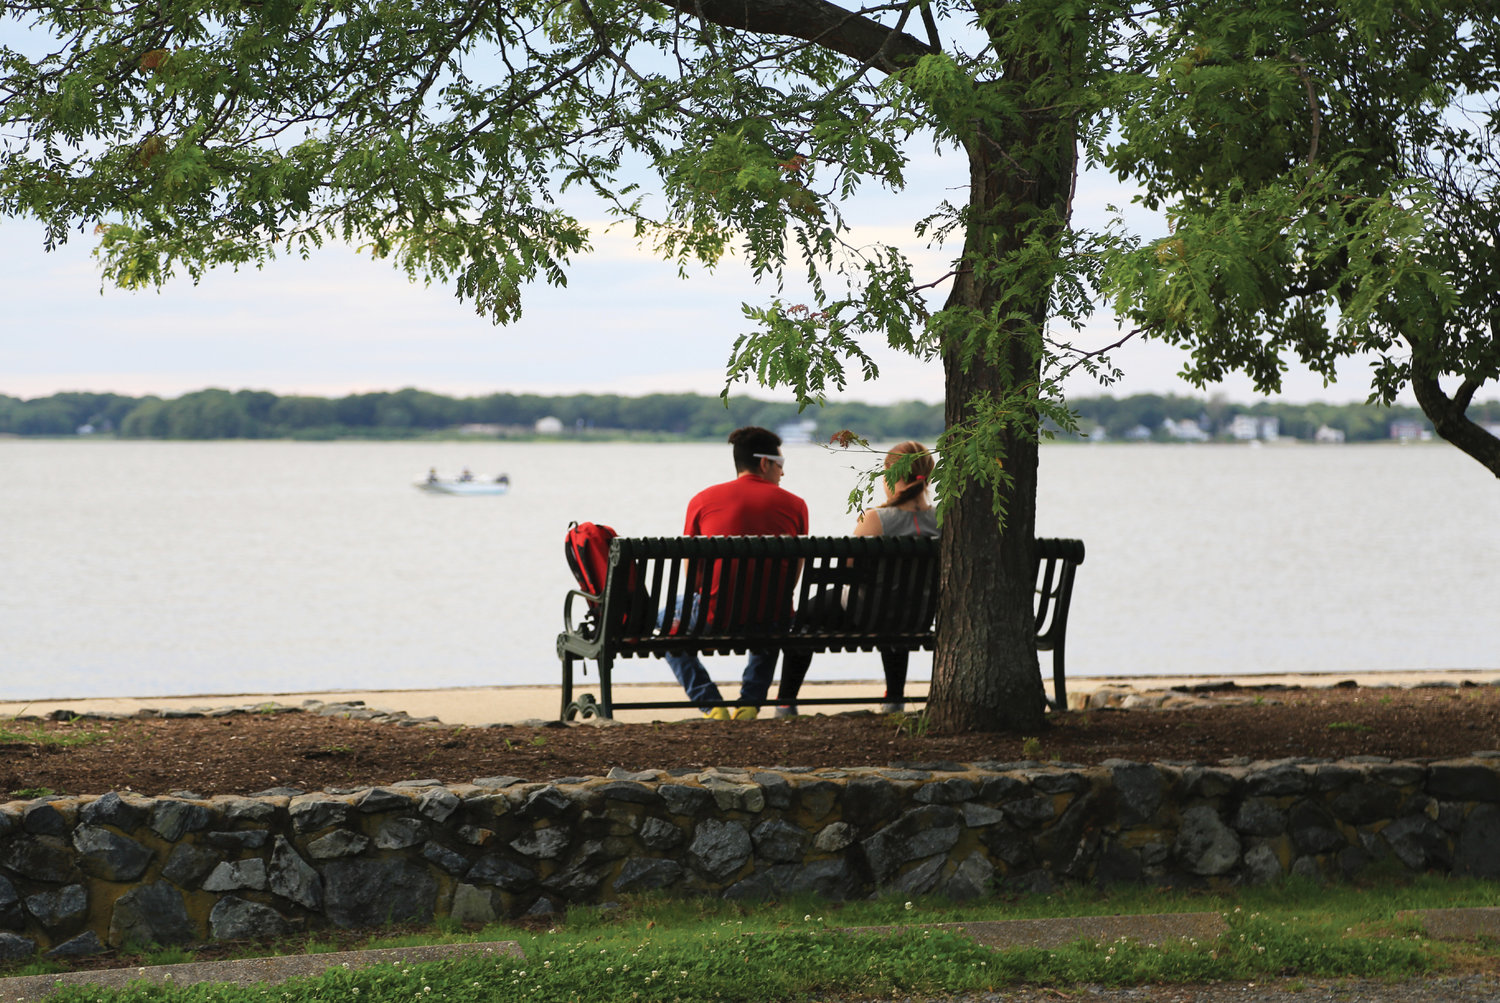 Goddard Memorial State Park offers a unique view of Narragansett Bay